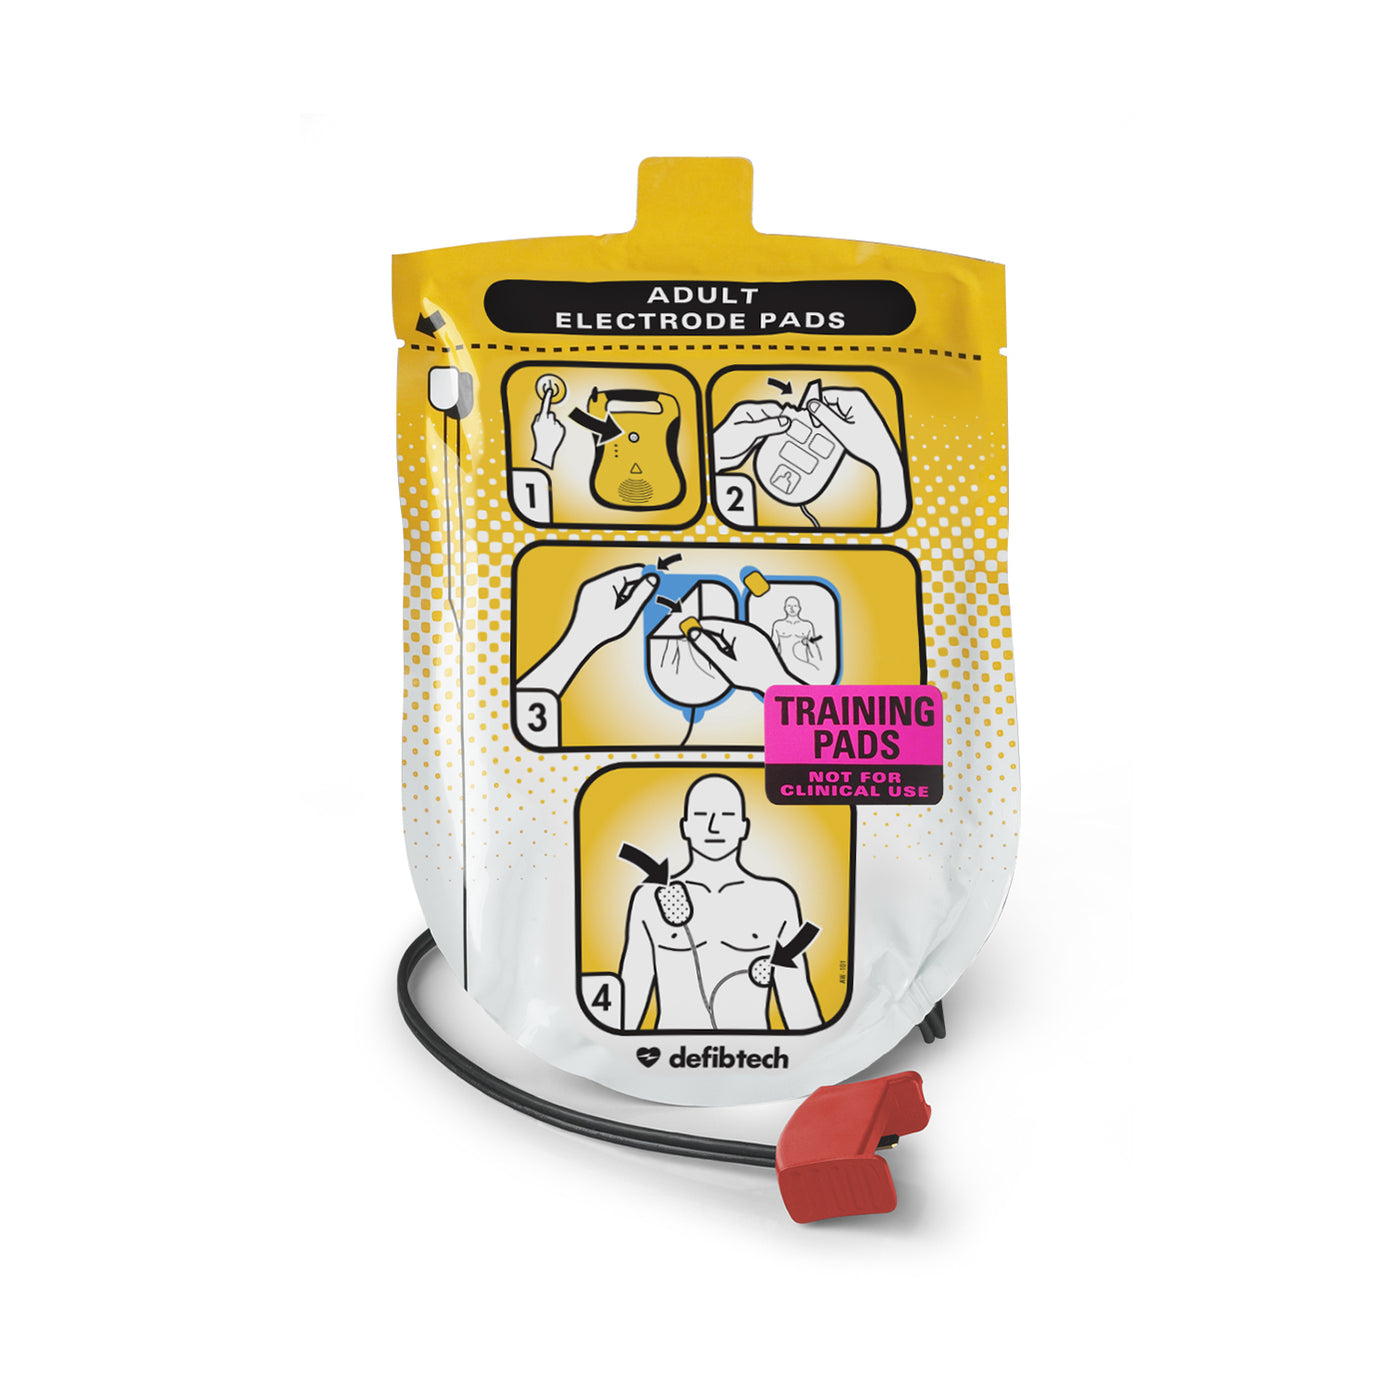 A yellow foil package containing adult training electrodes for a Defibtech Lifeline AED.